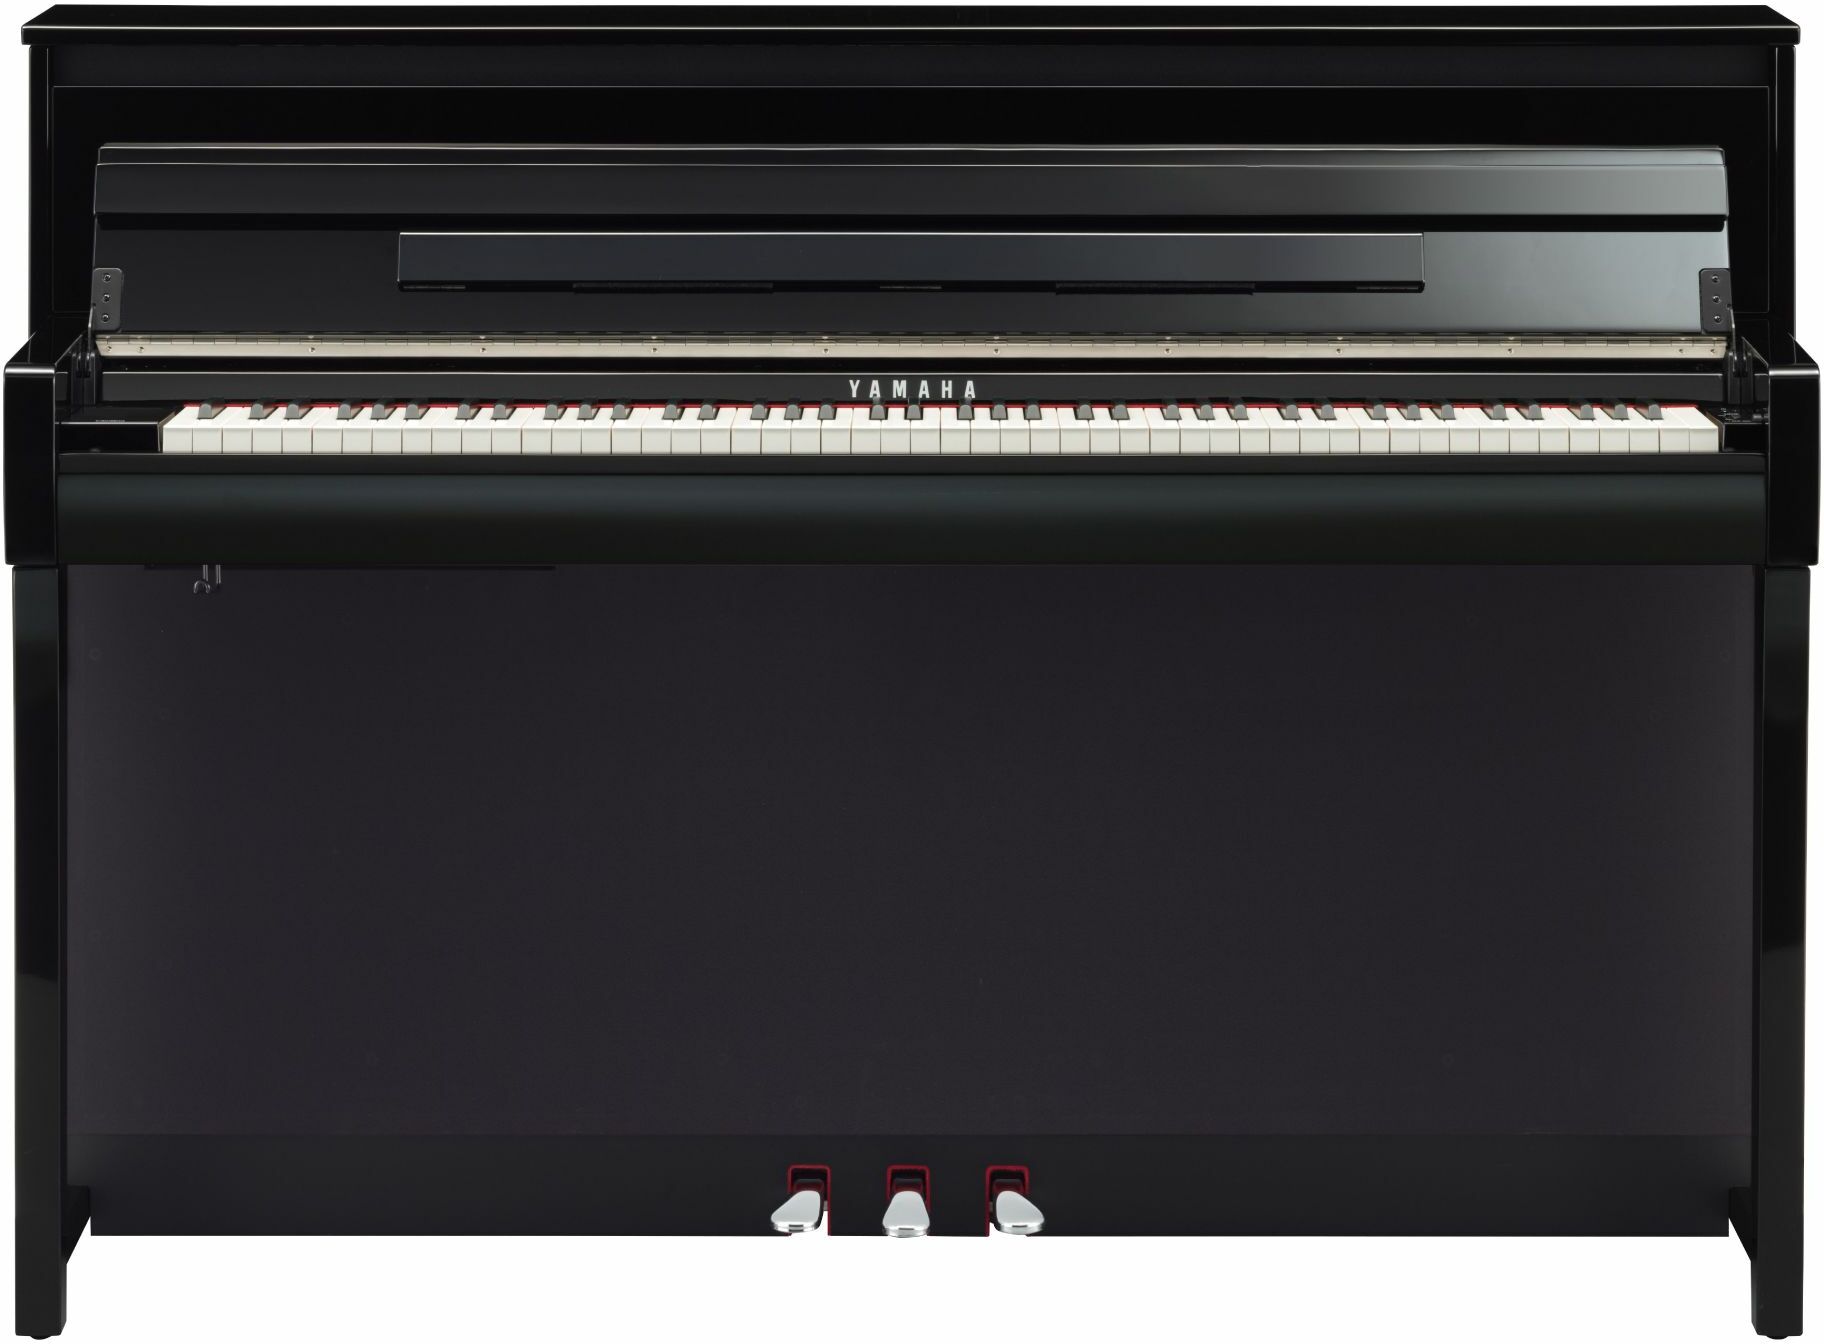 Yamaha Clp 785 Pe - Digital piano with stand - Main picture